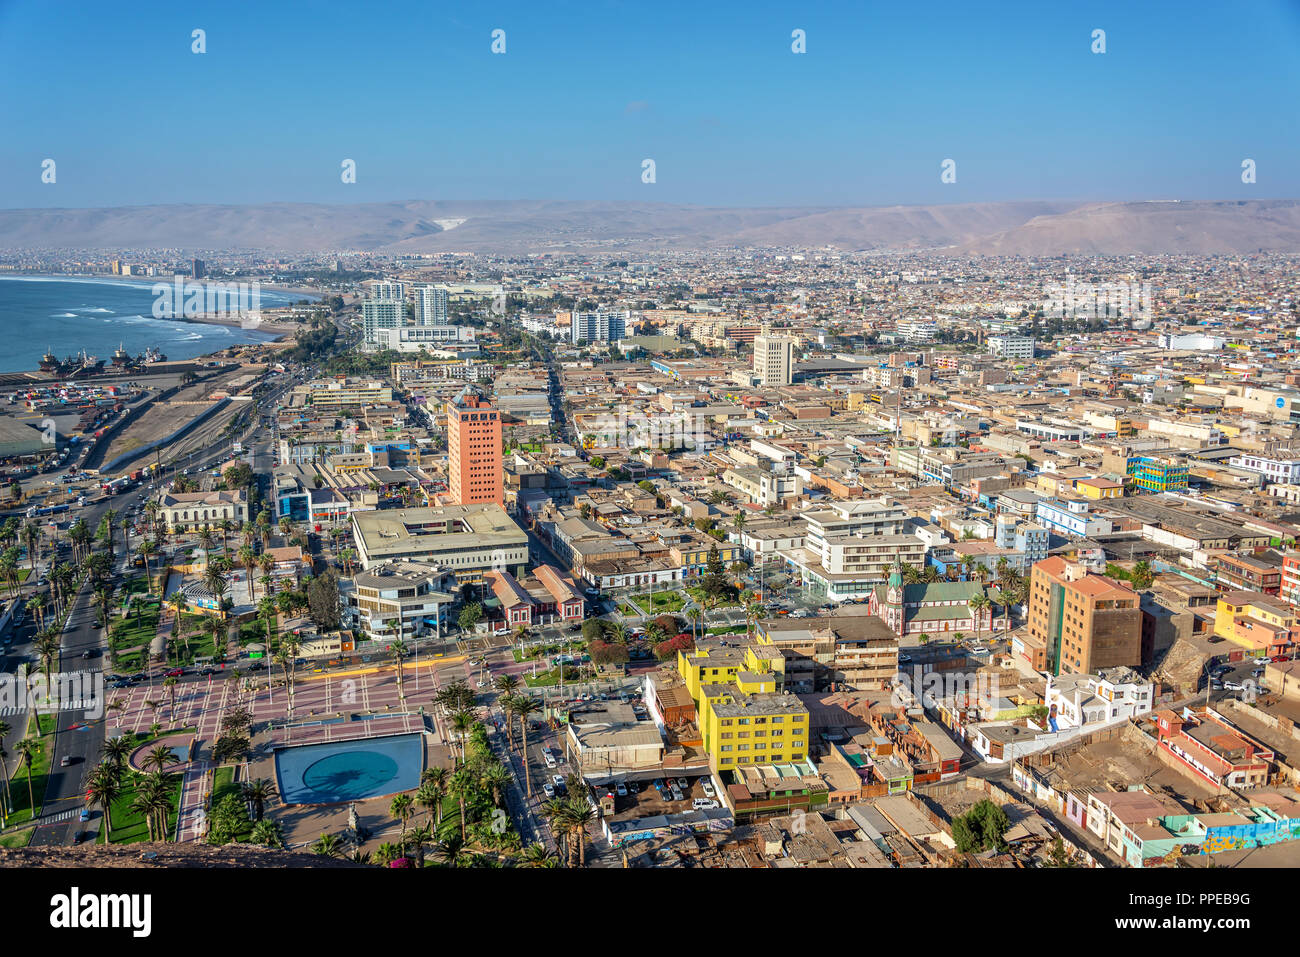 Aerial view of the city of Arica, Chile Stock Photo